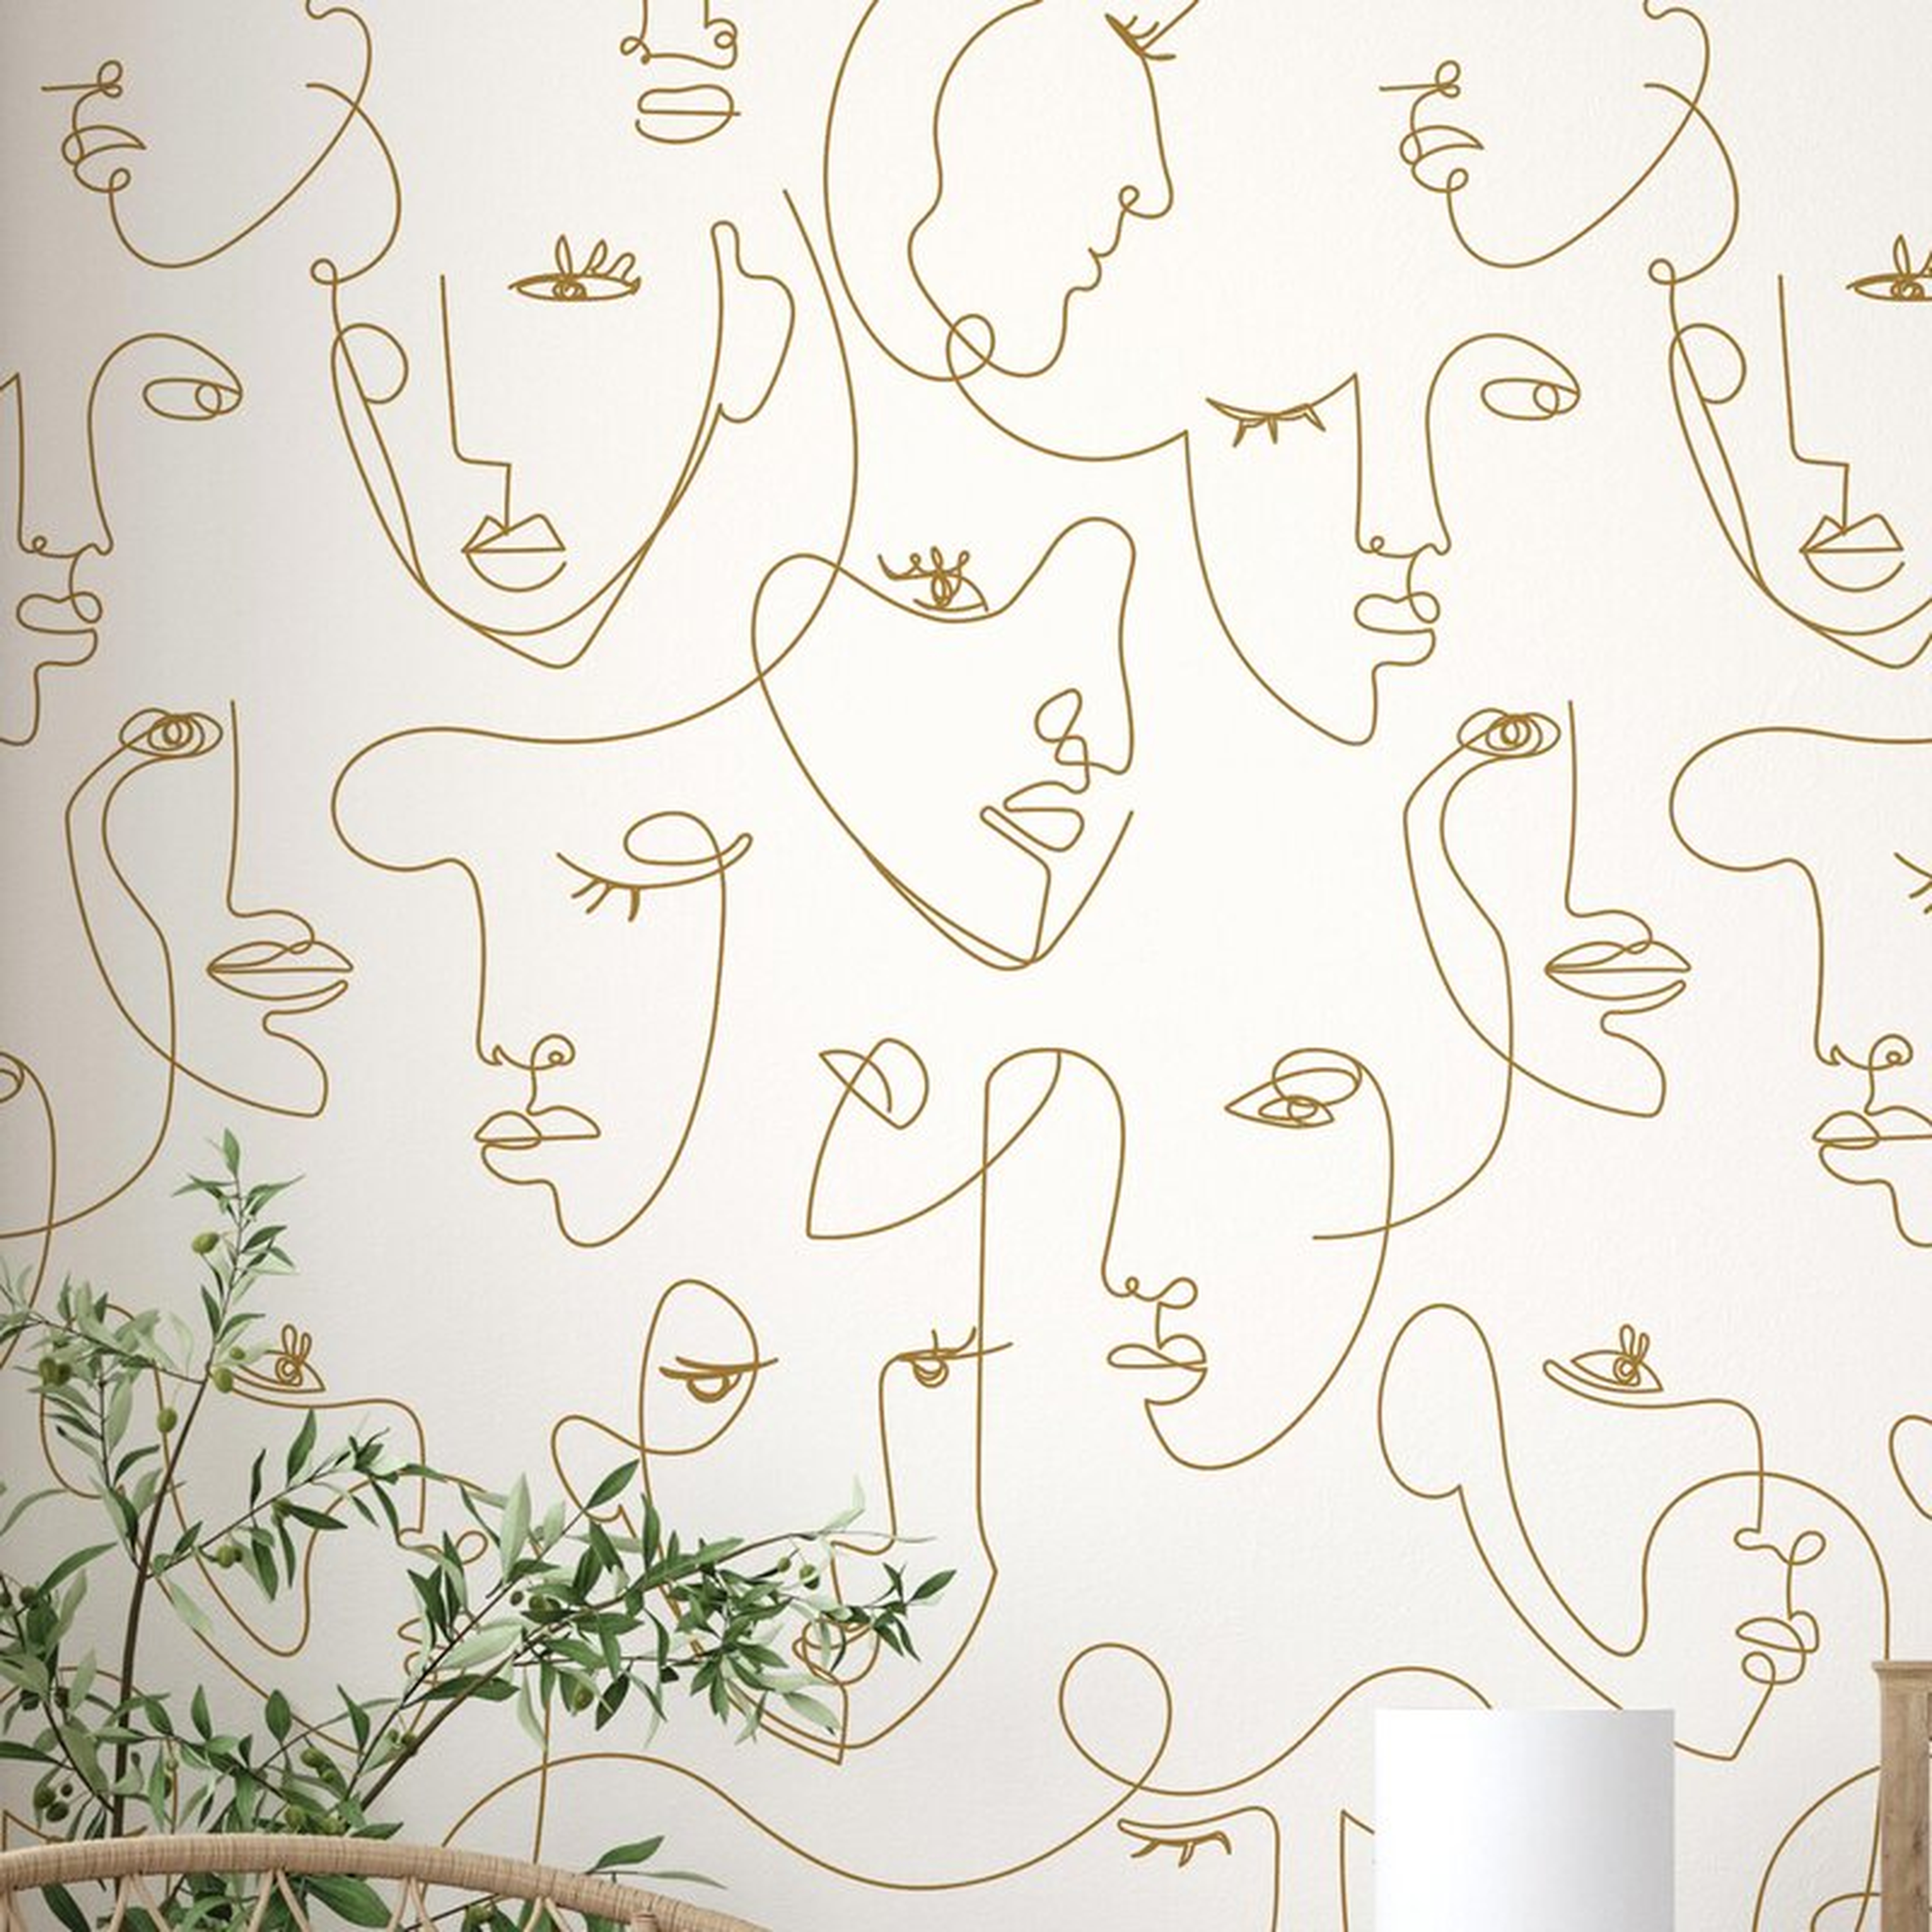 Charnley Minimalist Face Line Textured Pell and Stick Wallpaper Tile / Gold - Wayfair